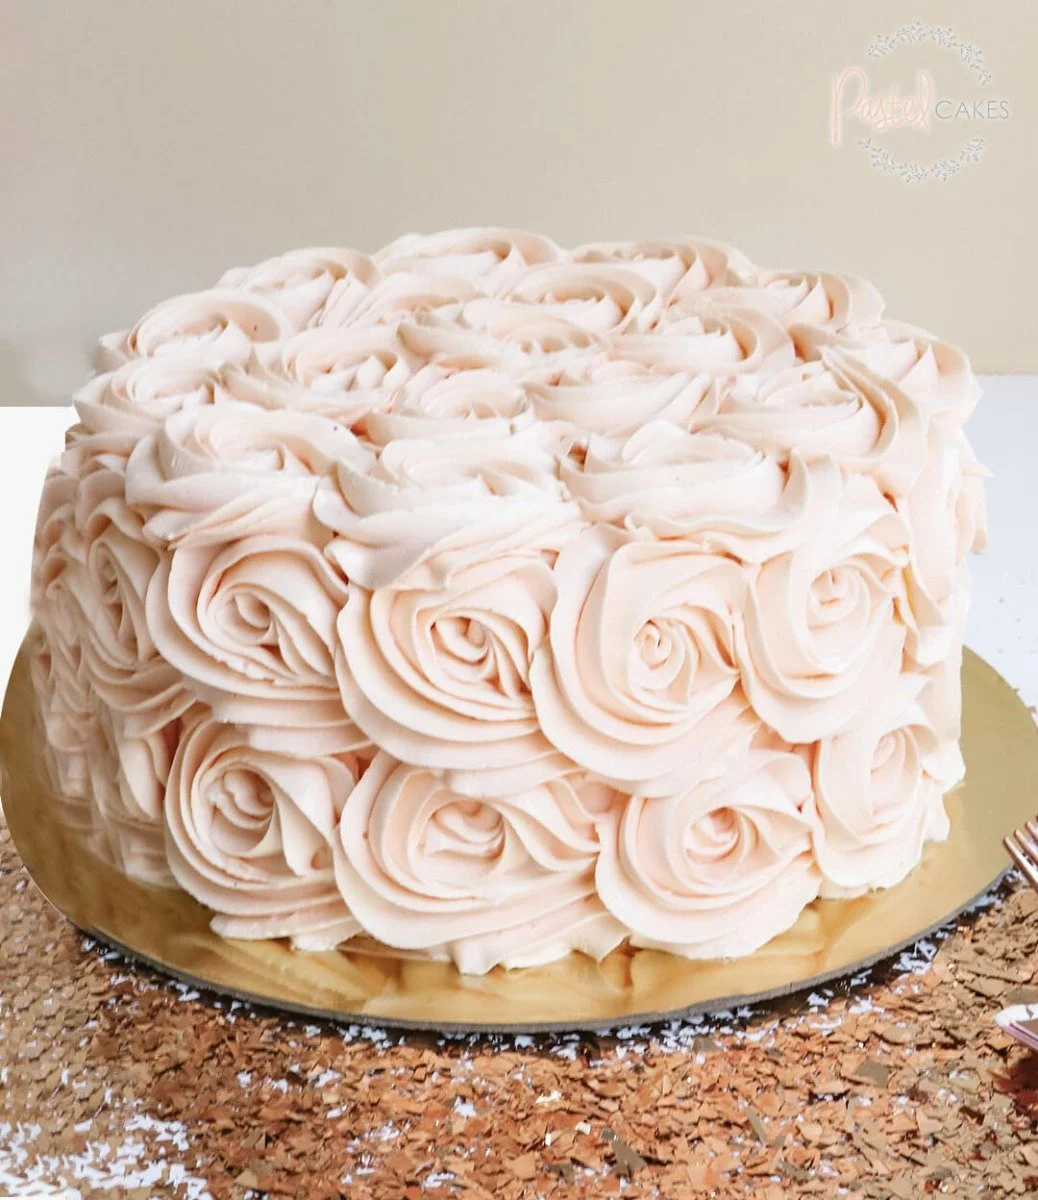 Pink Florals Cake By Pastel Cakes